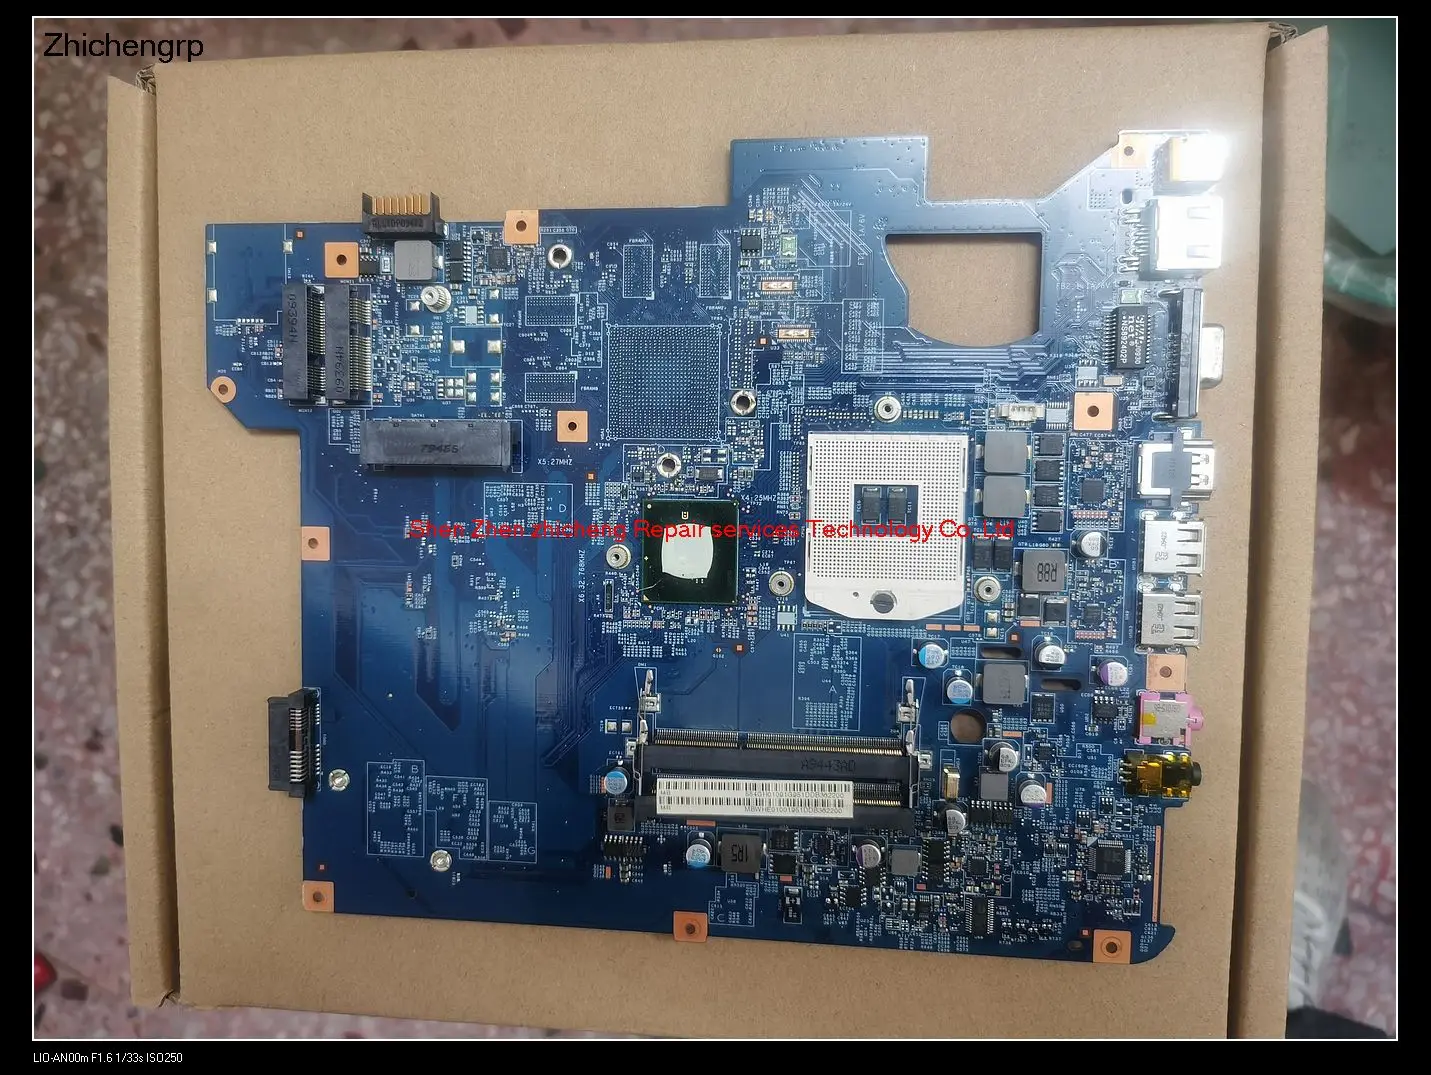 MBWHE01001     NV59 Laptop Motherboard SJV50-CP 09284-1M 48.4GH01.01M Mainboard 100%tested fully work